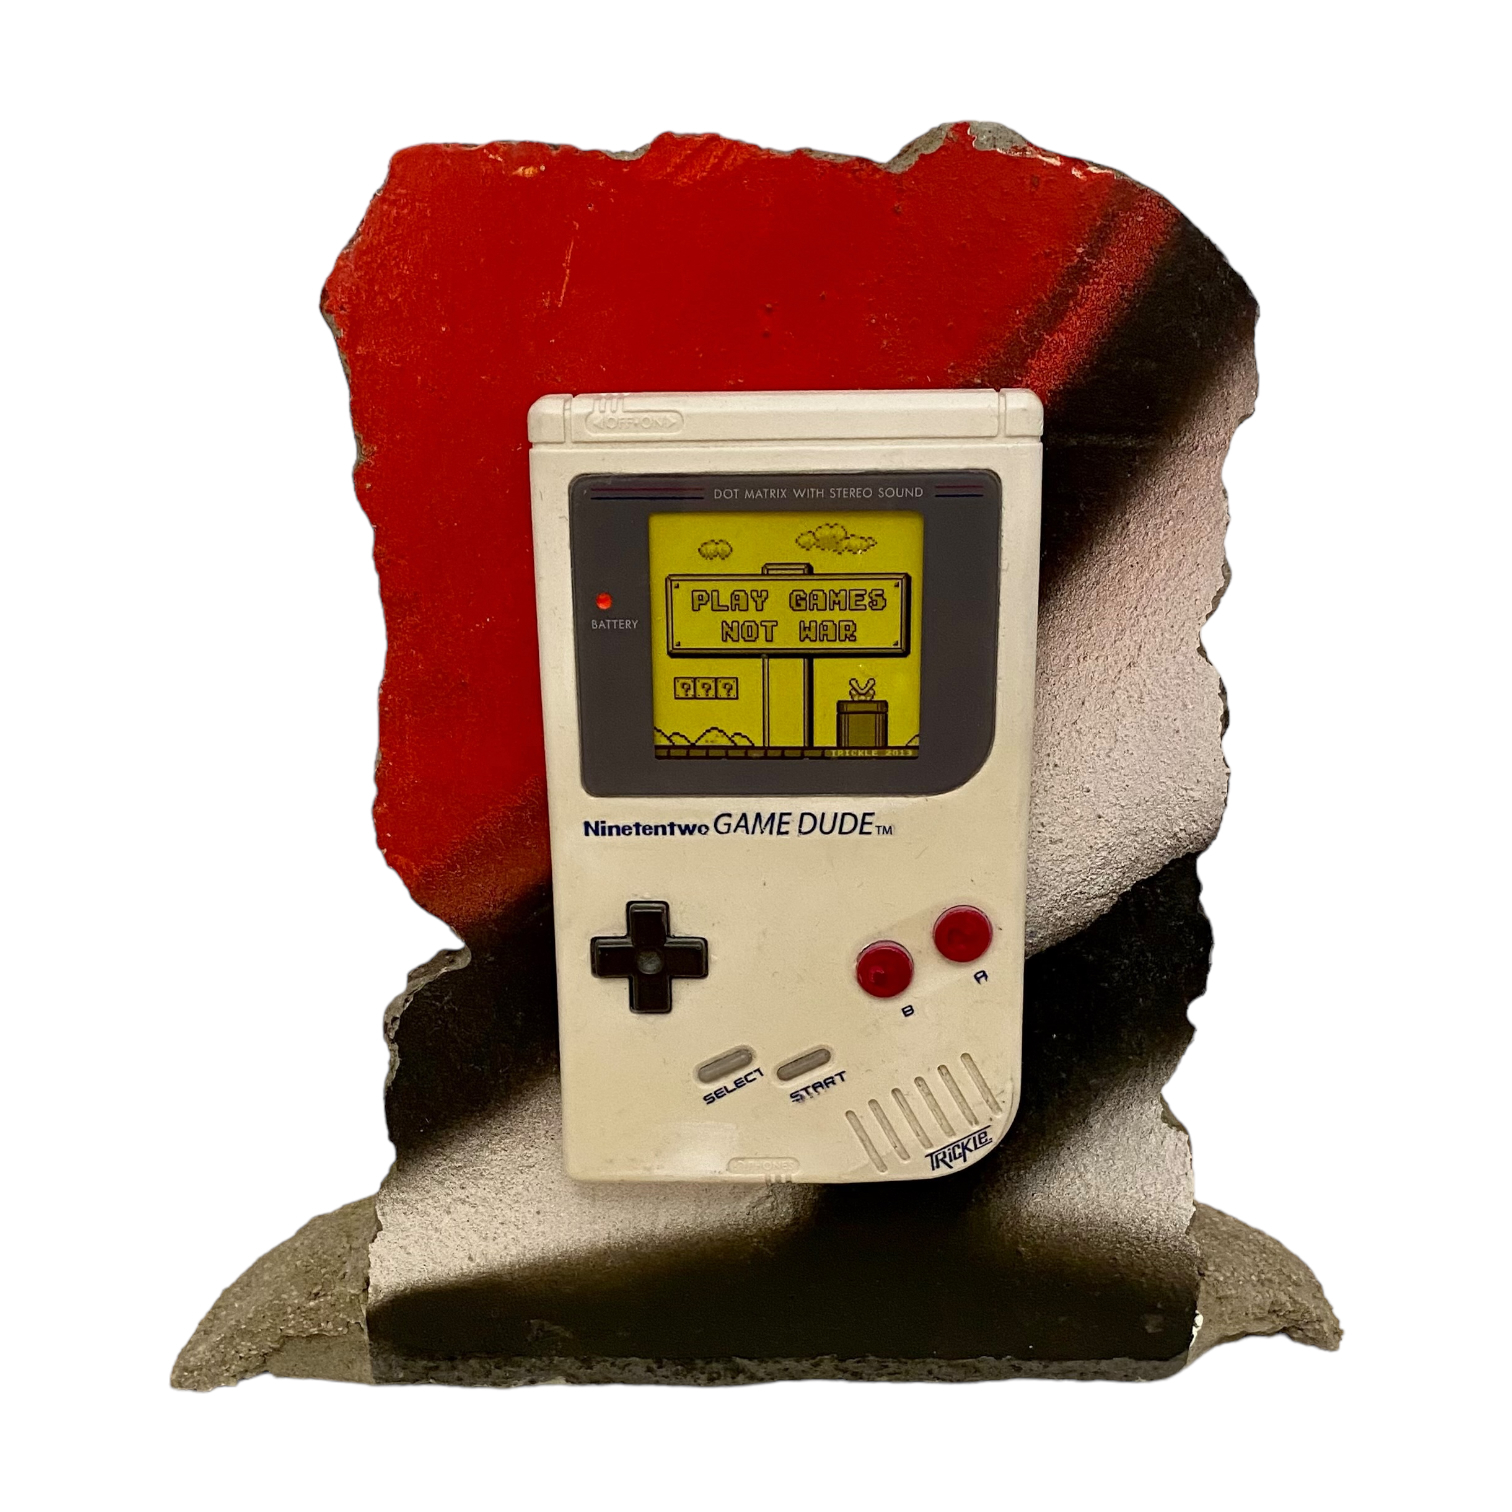 Trickle, Play games not war, 25x25 cm, Special plaster mix and concrete, 2013-2022